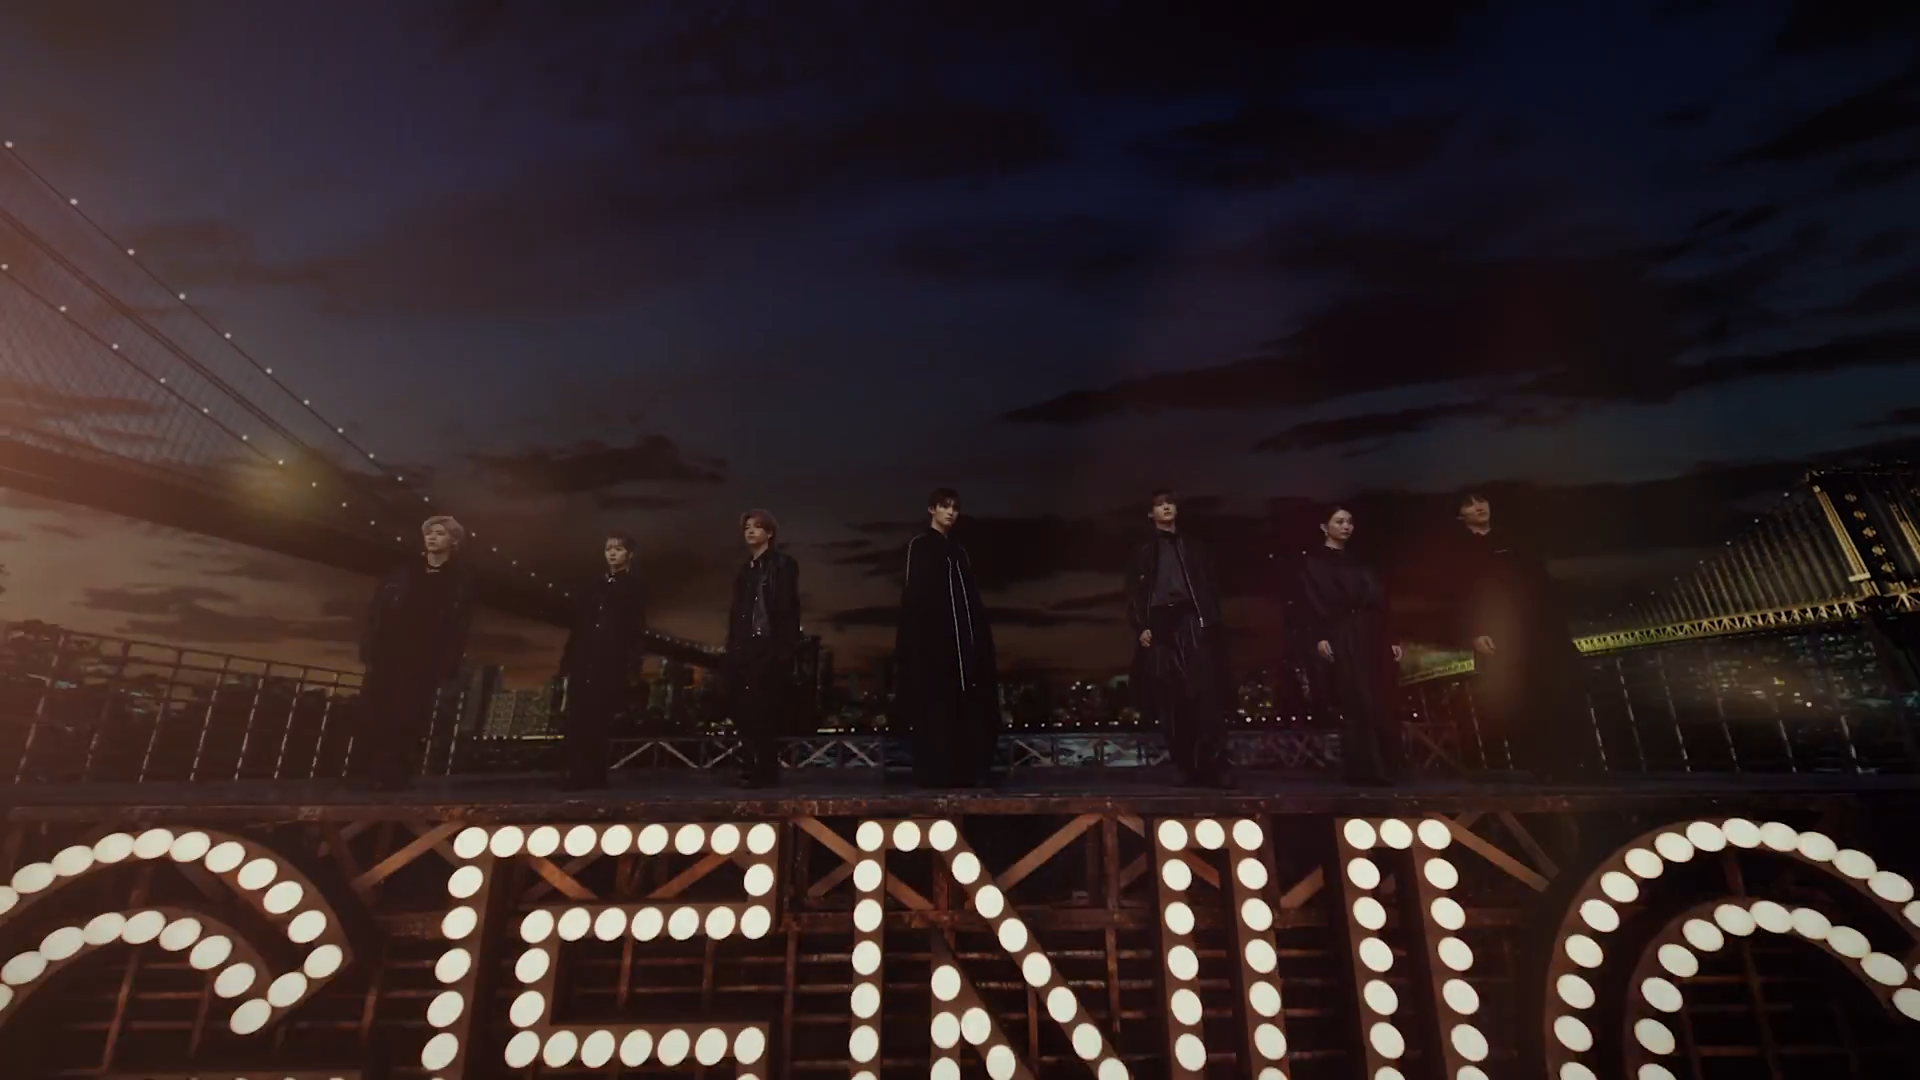 GENIC 「N_G」Official Music Video details